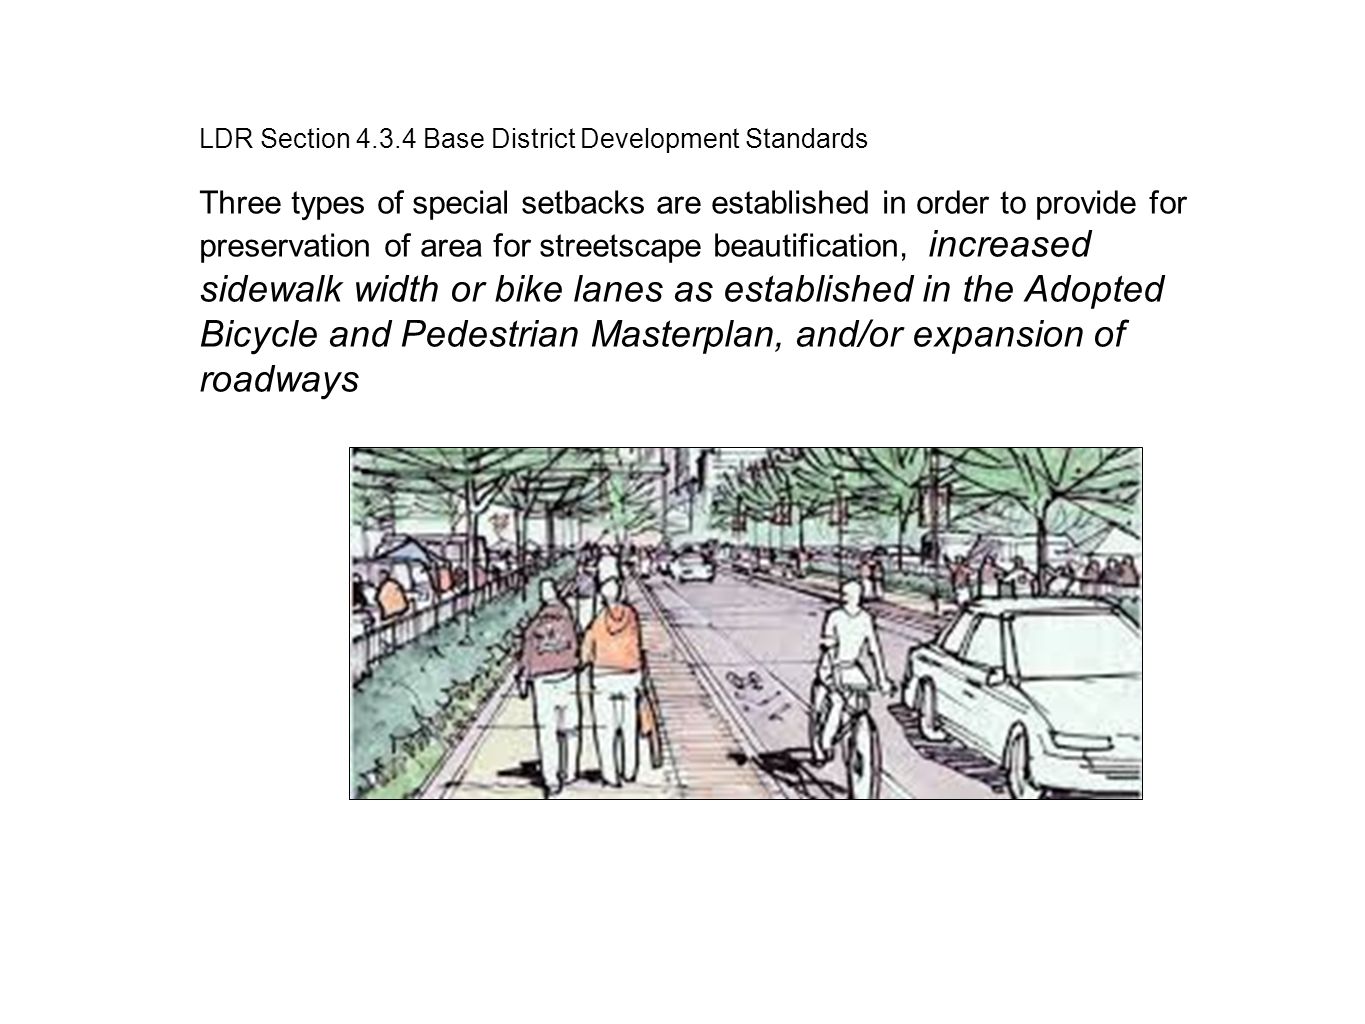 LDR Section Base District Development Standards Three types of special setbacks are established in order to provide for preservation of area for streetscape beautification, increased sidewalk width or bike lanes as established in the Adopted Bicycle and Pedestrian Masterplan, and/or expansion of roadways